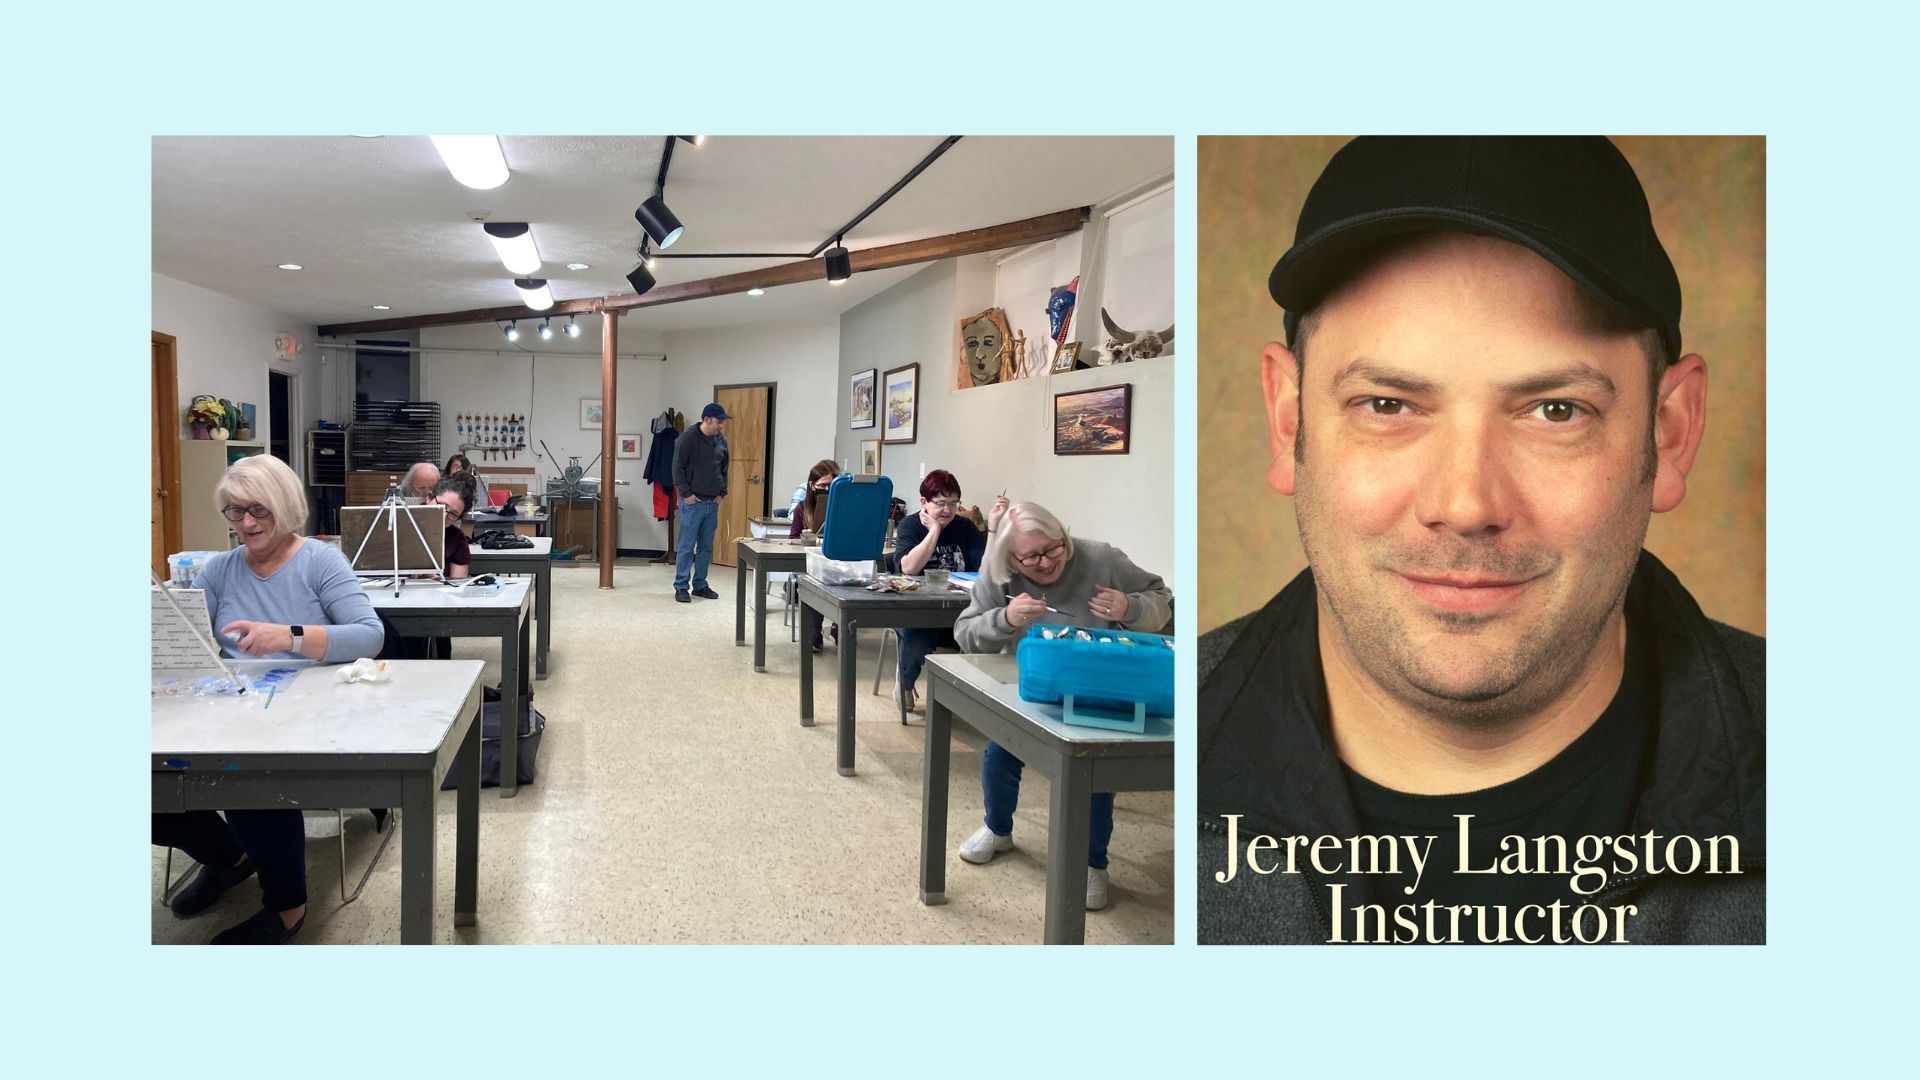 classroom of students happily painting. instructor Jeremy Langston